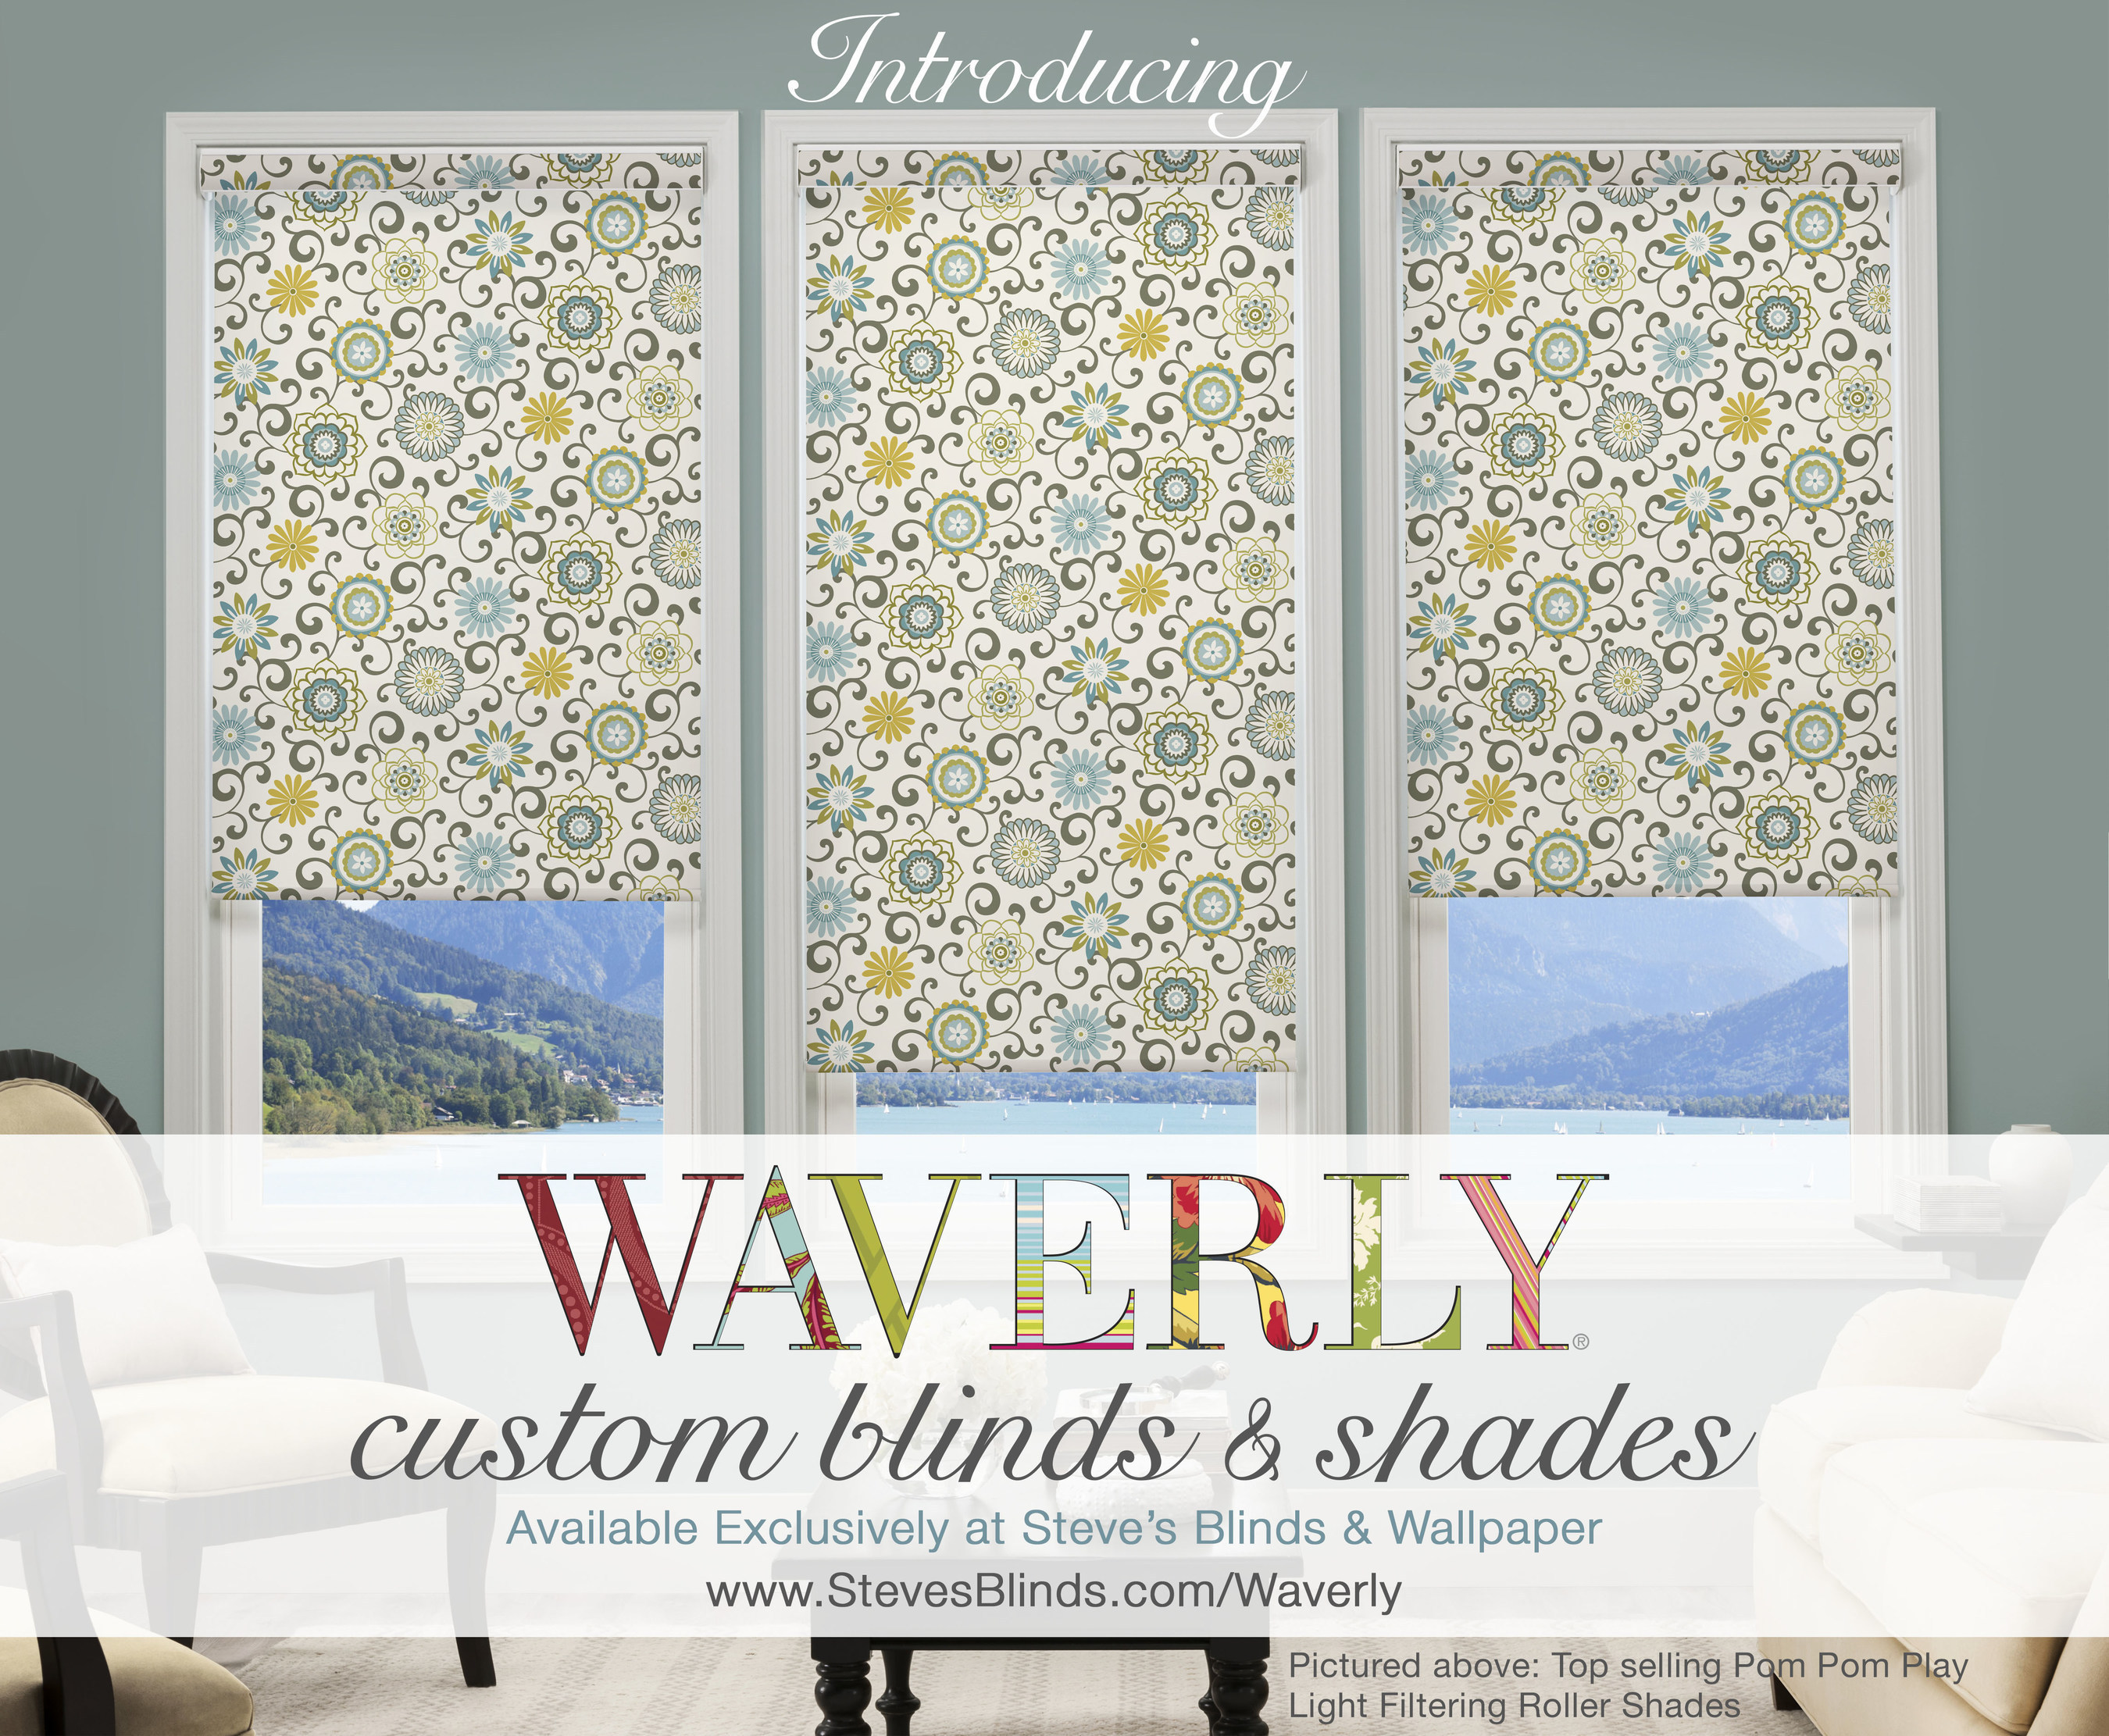 Steve S Blinds Wallpaper And Waverly Join Forces To Introduce Exclusive Collection Of Custom Blinds And Shades